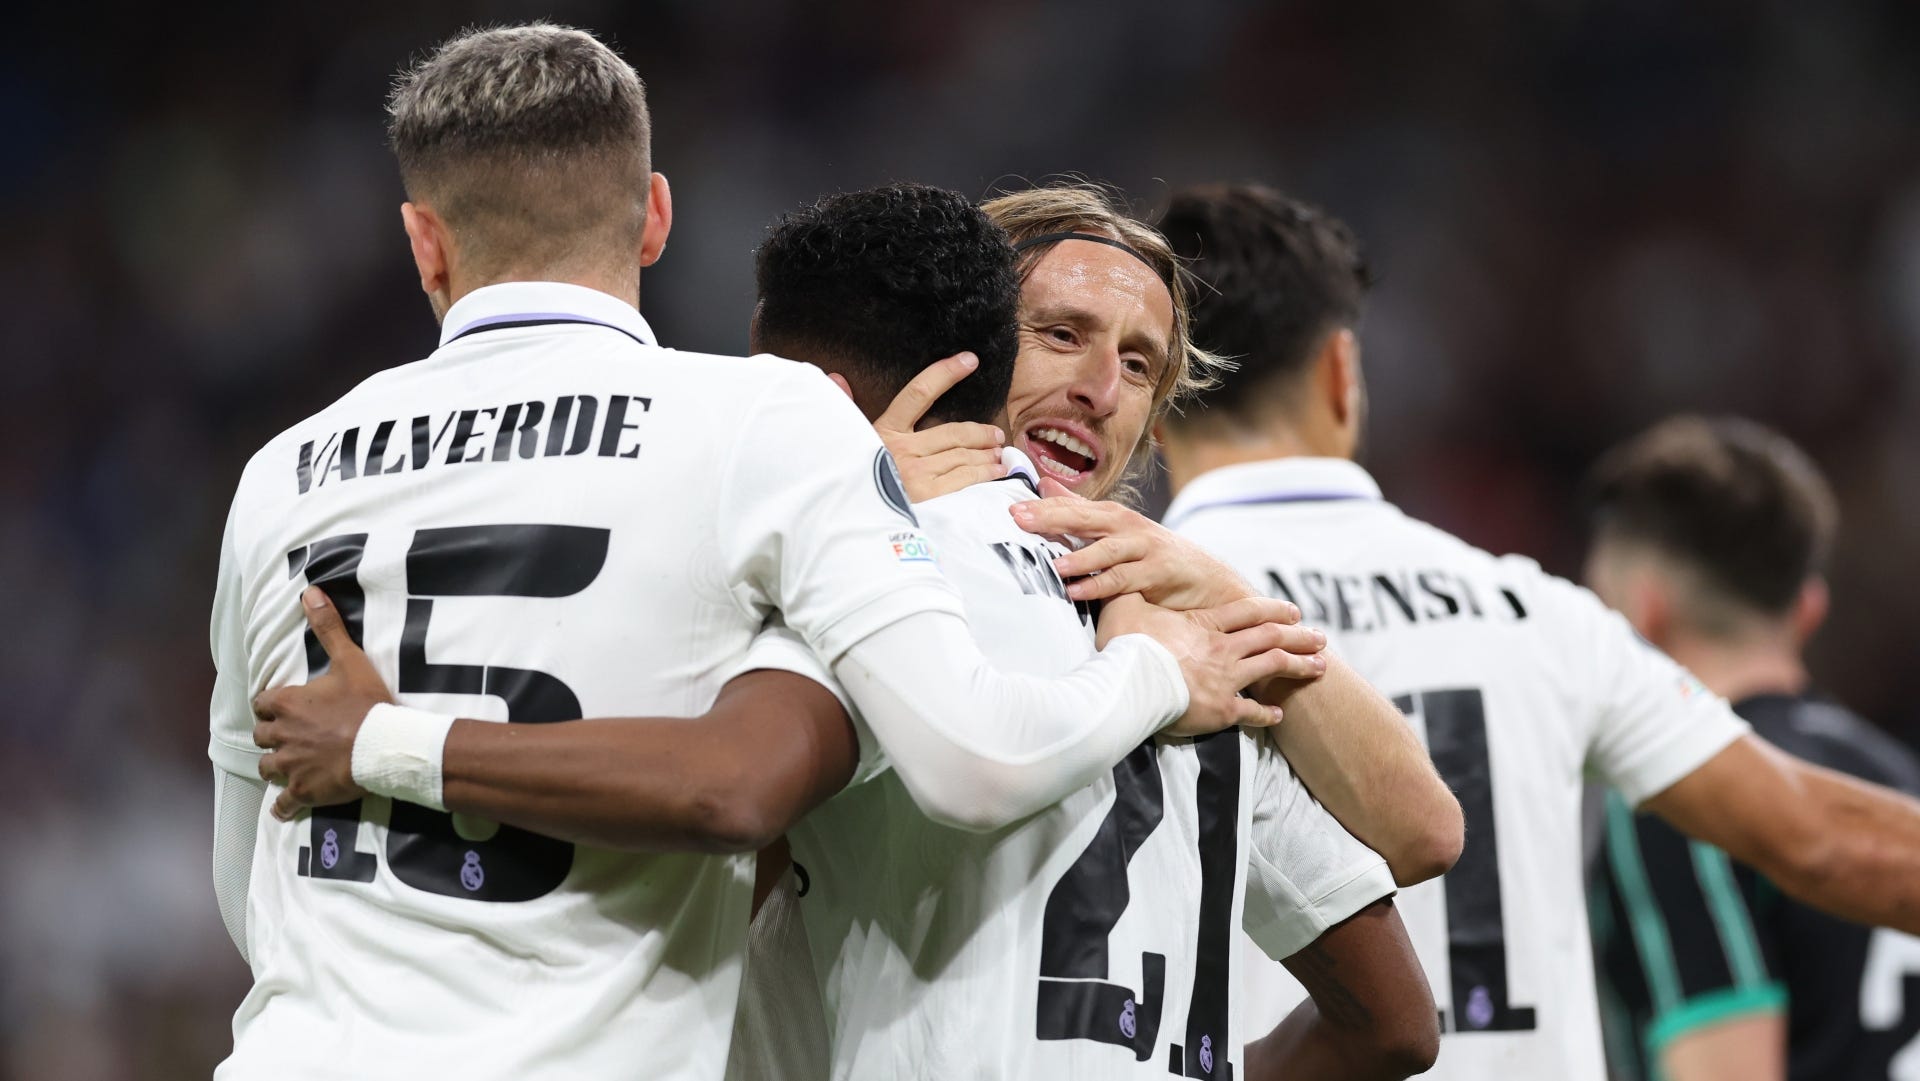 Real Madrid vs Mallorca: A Clash of Giants on the Football Field